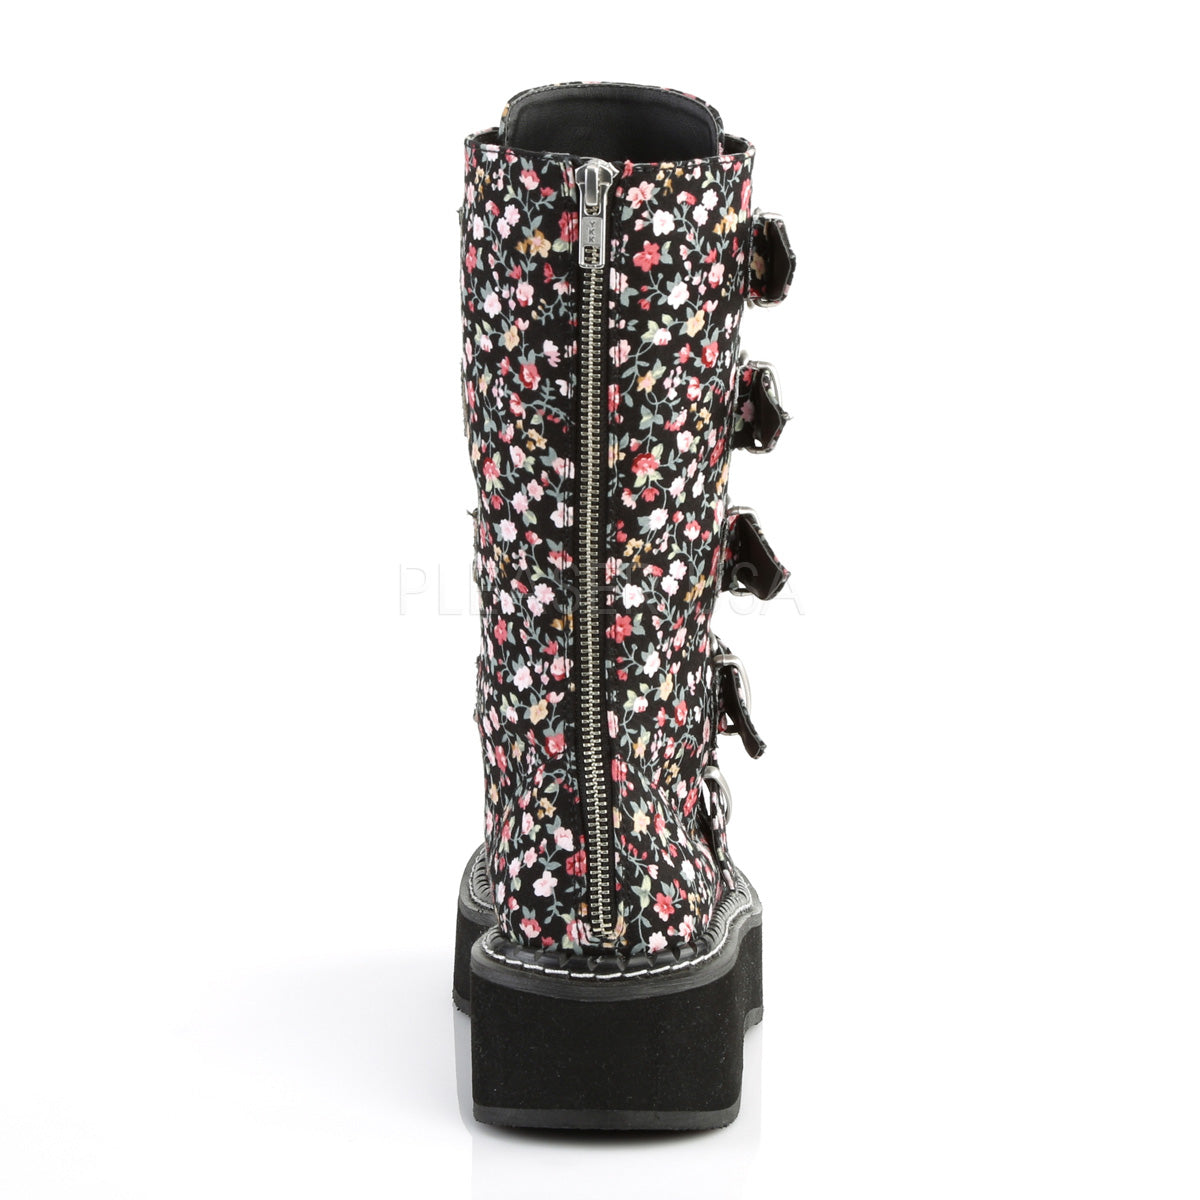 My Cute Flowers Mid Calf Boots